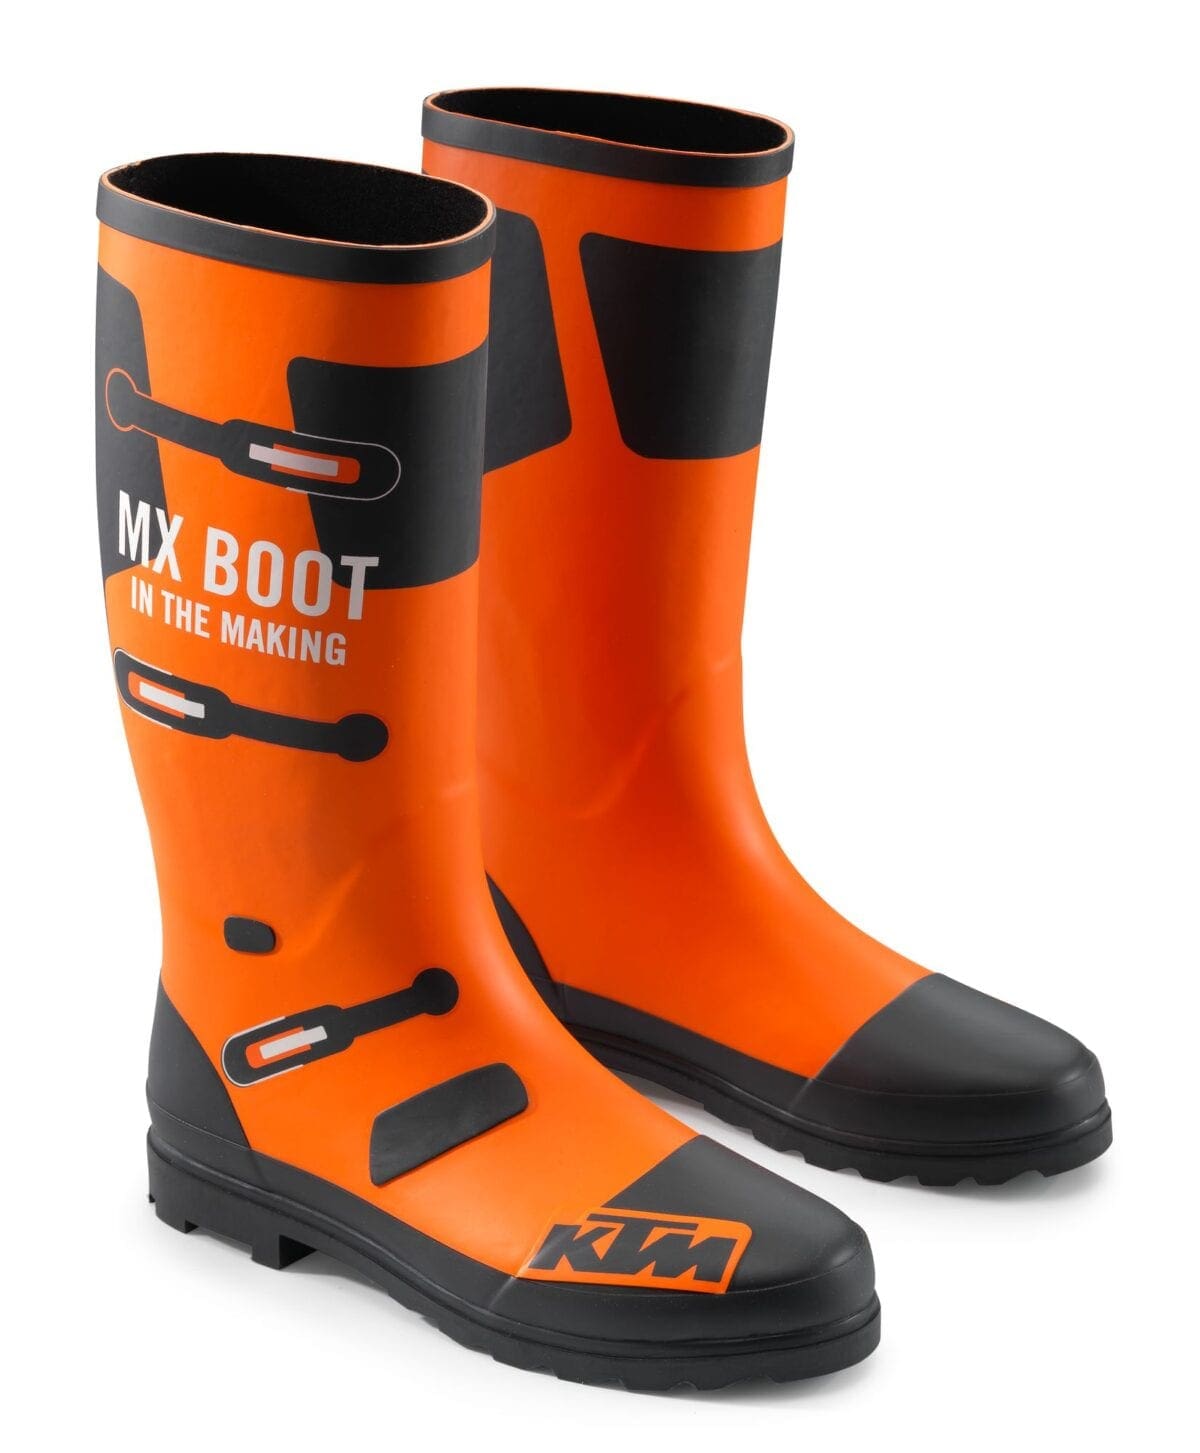 Fancy some KTM stuff for Christmas?